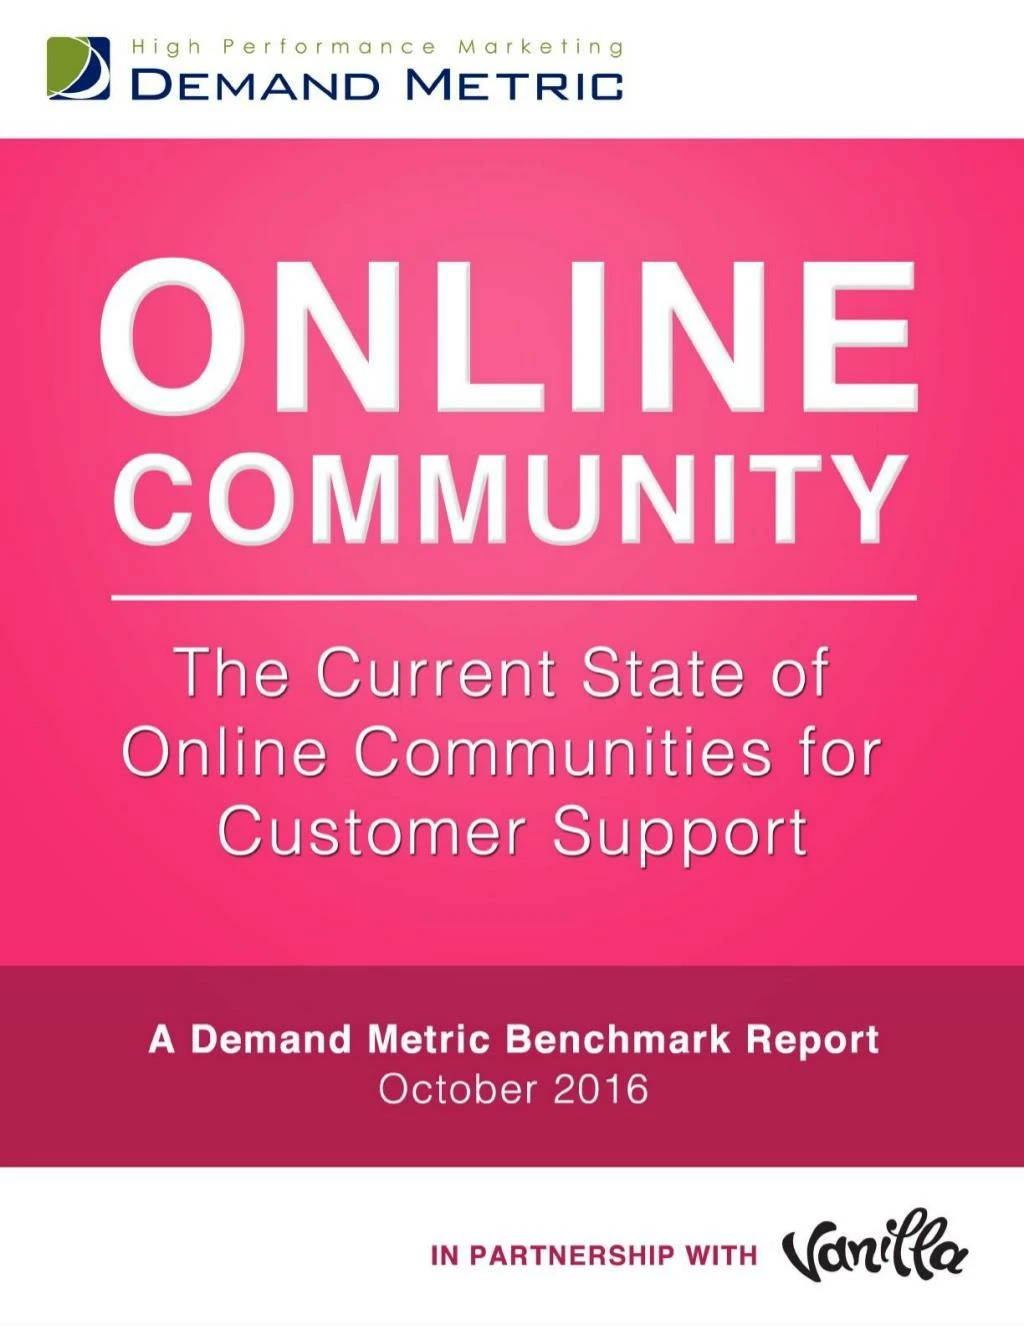 the current state of online communities for customer support